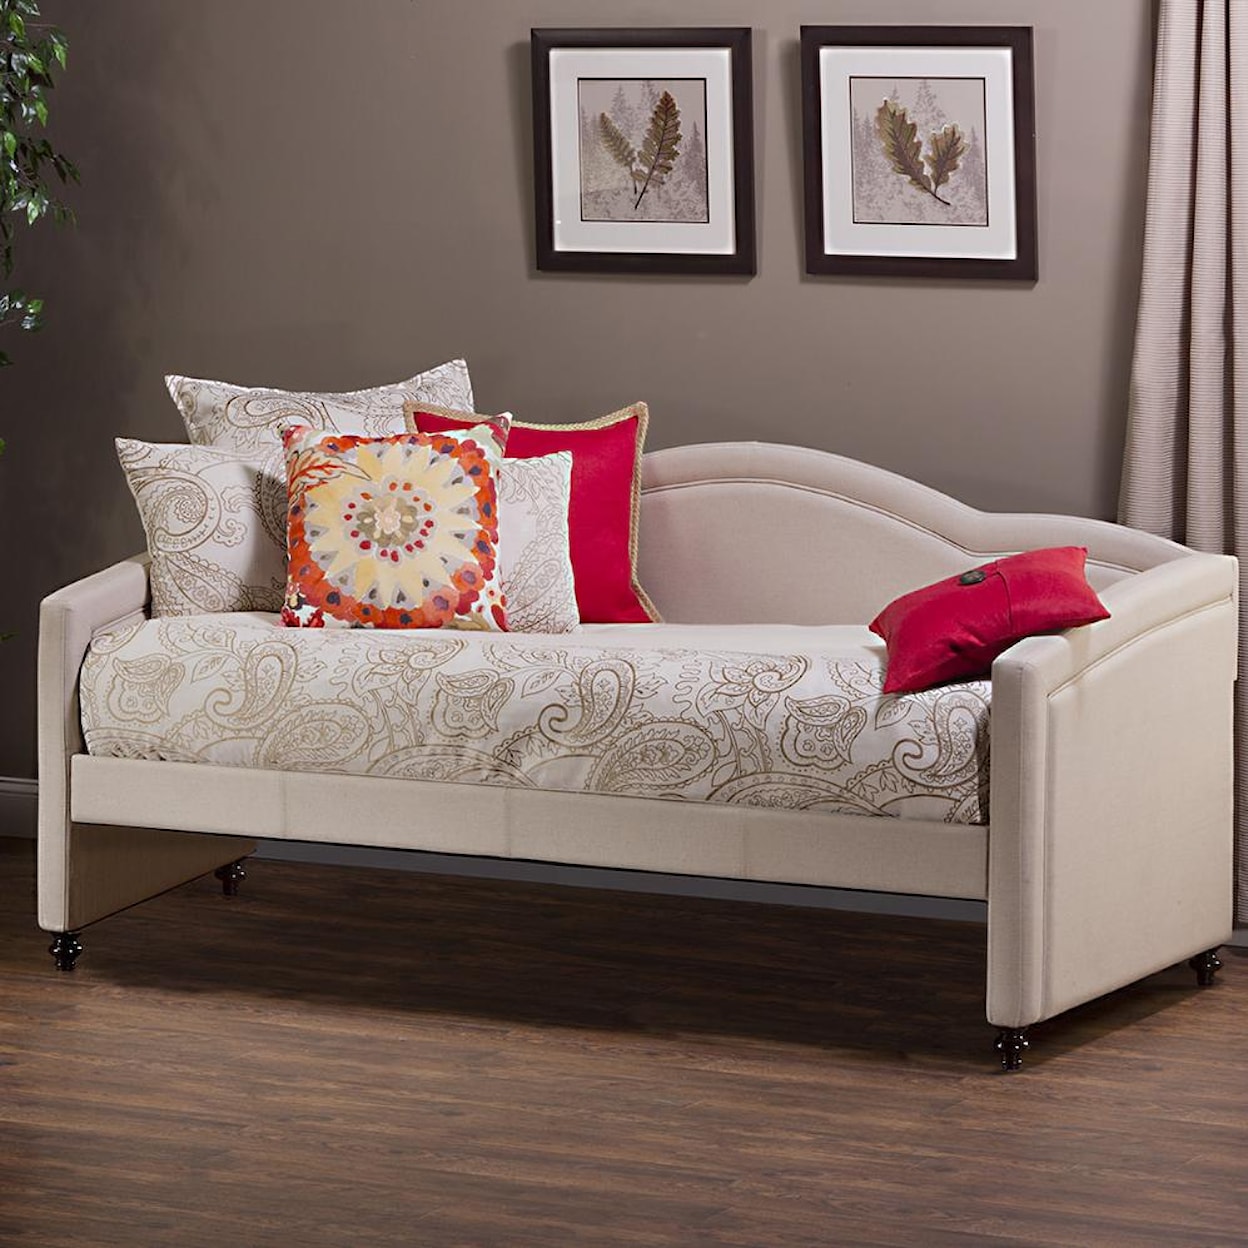 Hillsdale Daybeds Jasmine Daybed